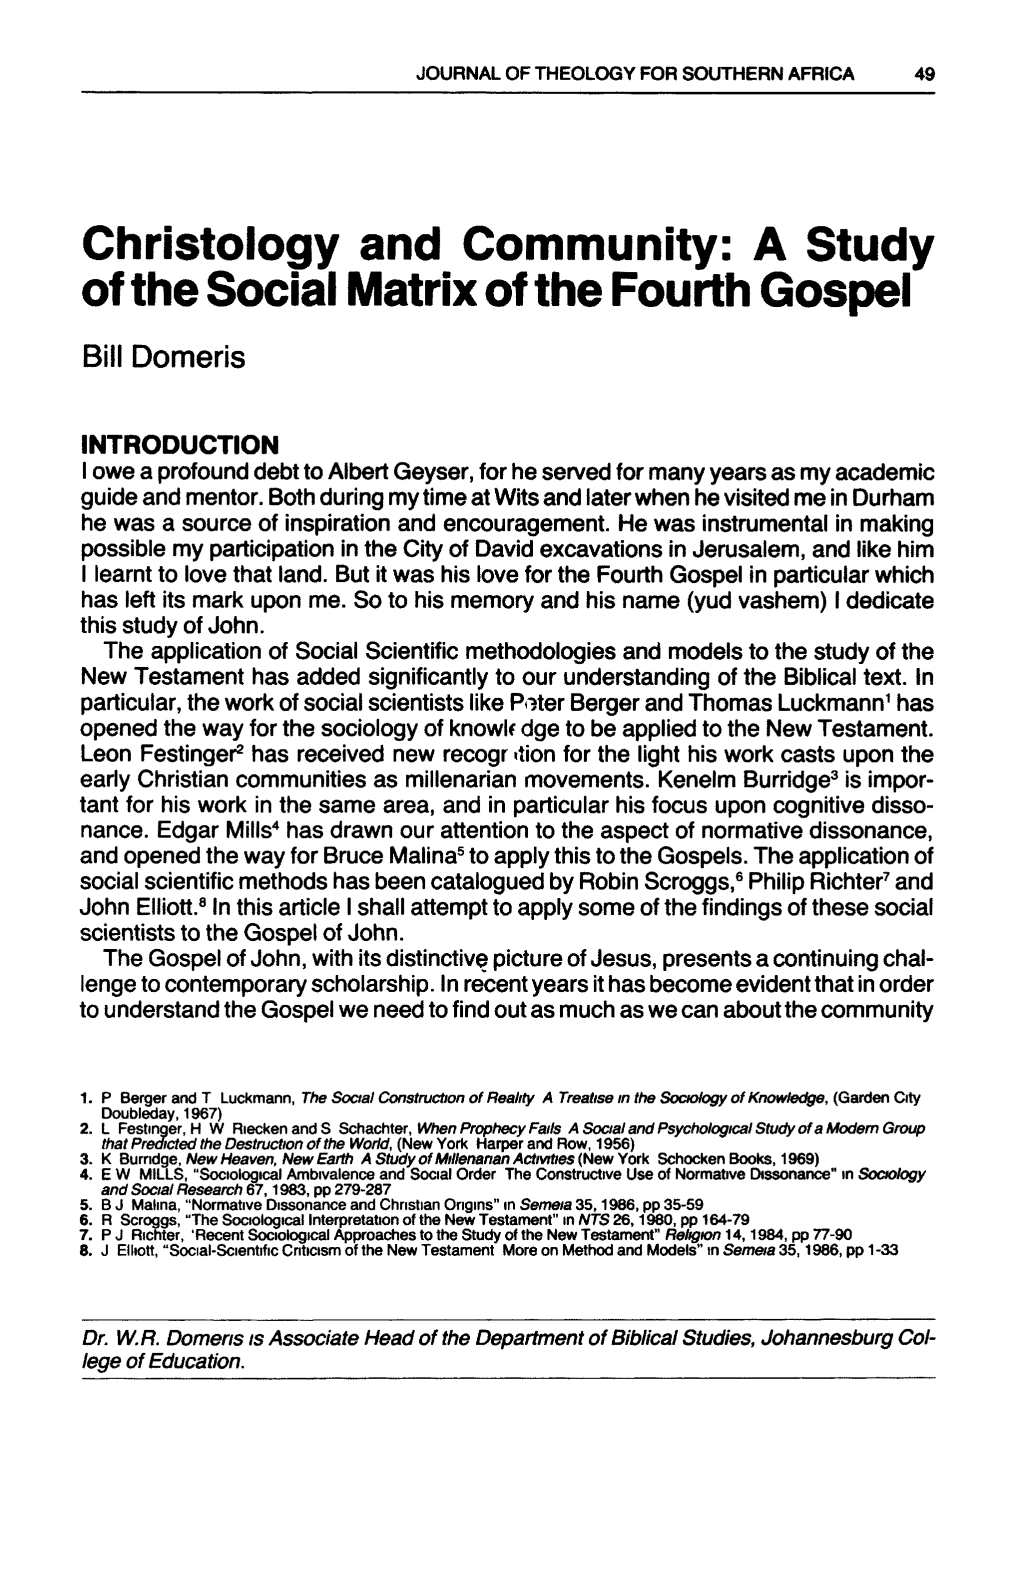 Christology and Community: a Study of the Social Matrix of the Fourth Gospel Bill Domeris